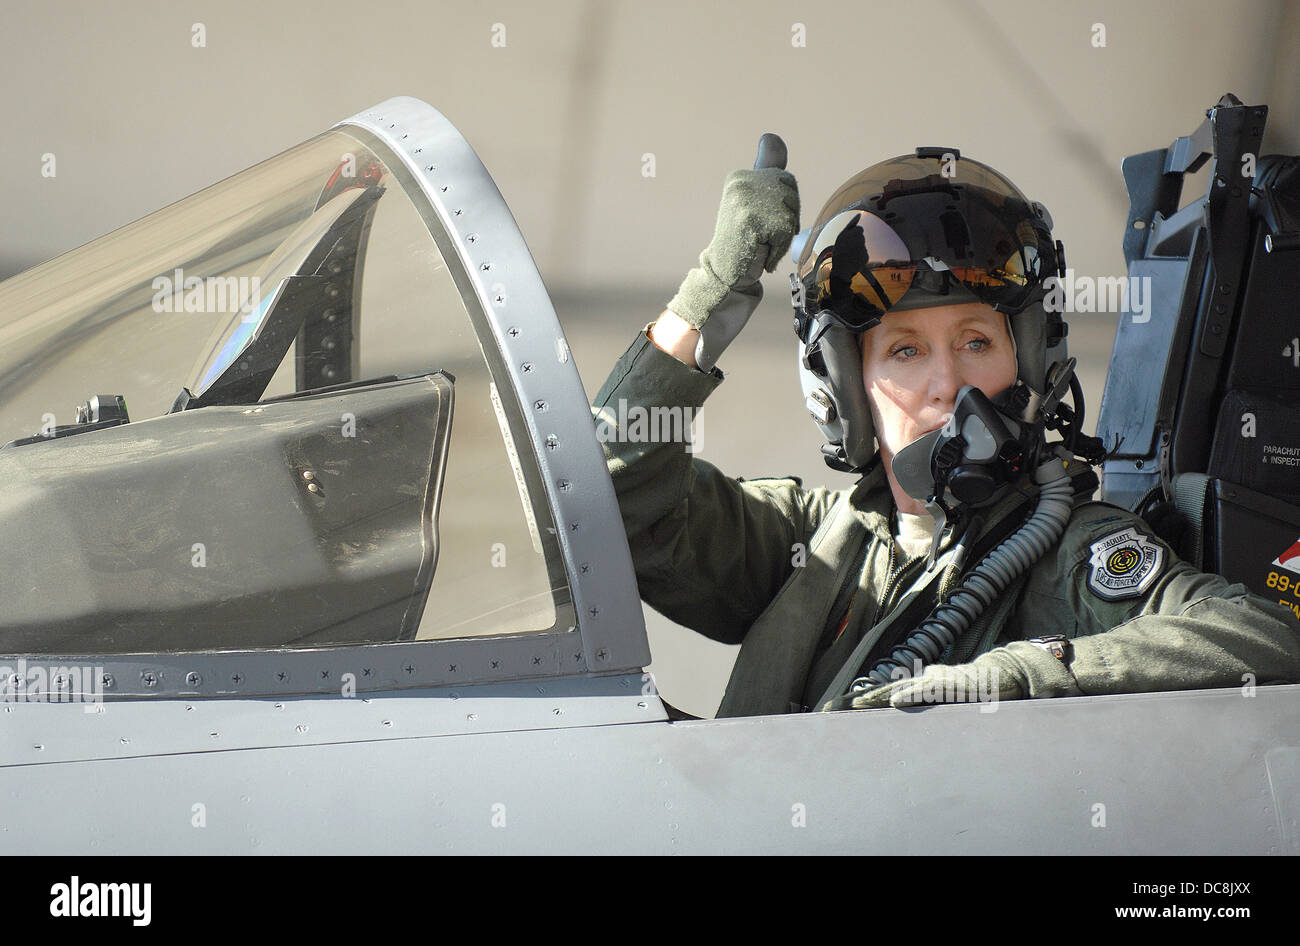 US Air Force Col. Jeannie Leavitt, the commander of the 4th Fighter Wing, signals her crew chief before taking off in a F-15E Strike Eagle fighter aircraft July 17, 2013 from Seymour Johnson Air Force Base, NC. The 336th Fighter Squadron resumed flying after a three-month suspension due to budget cuts. Stock Photo